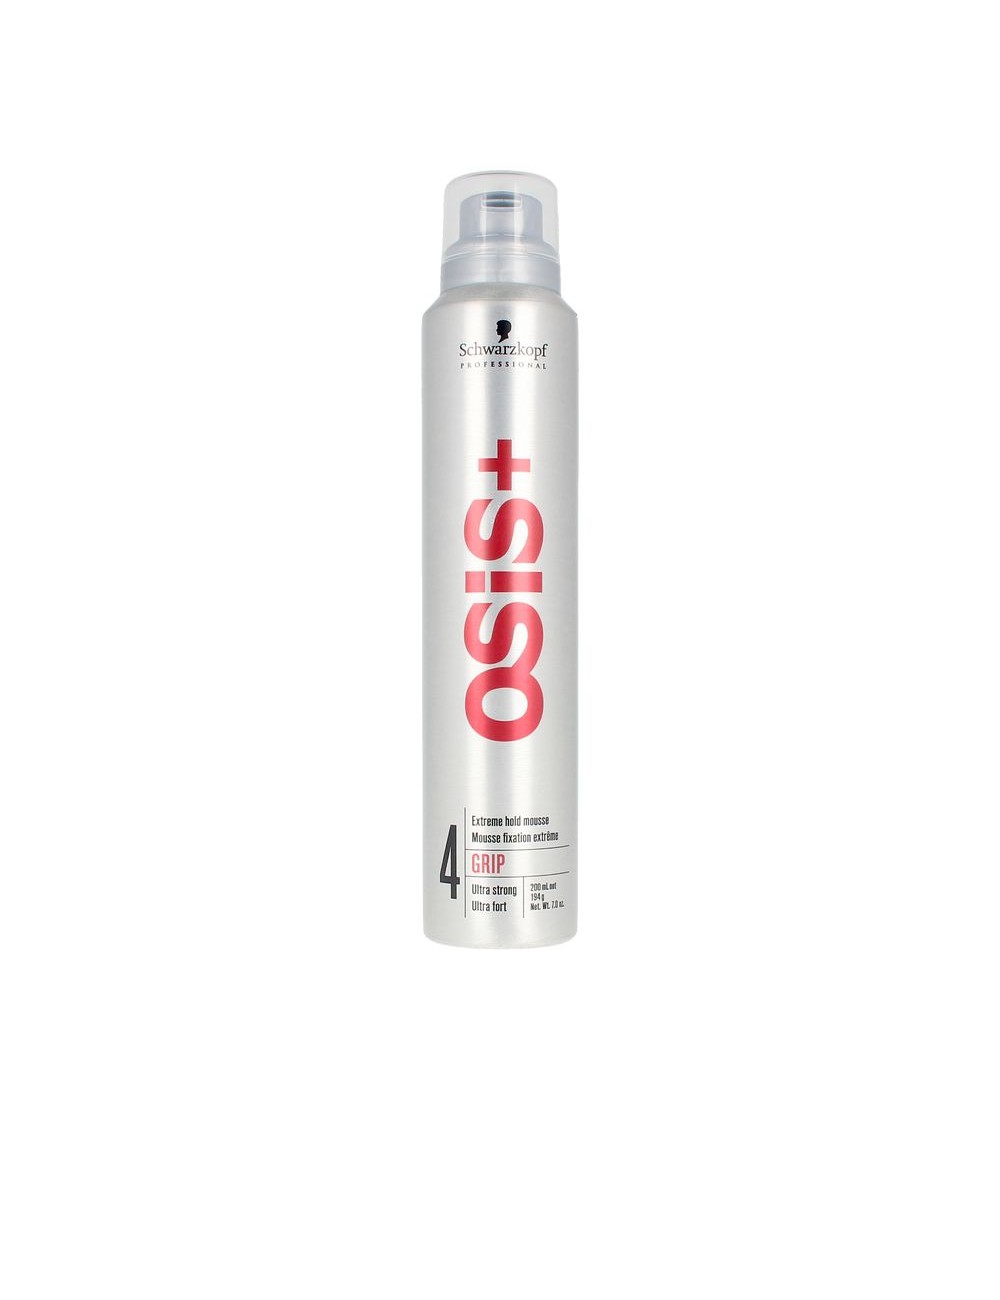 OSIS grip extreme hold mousse 200ml